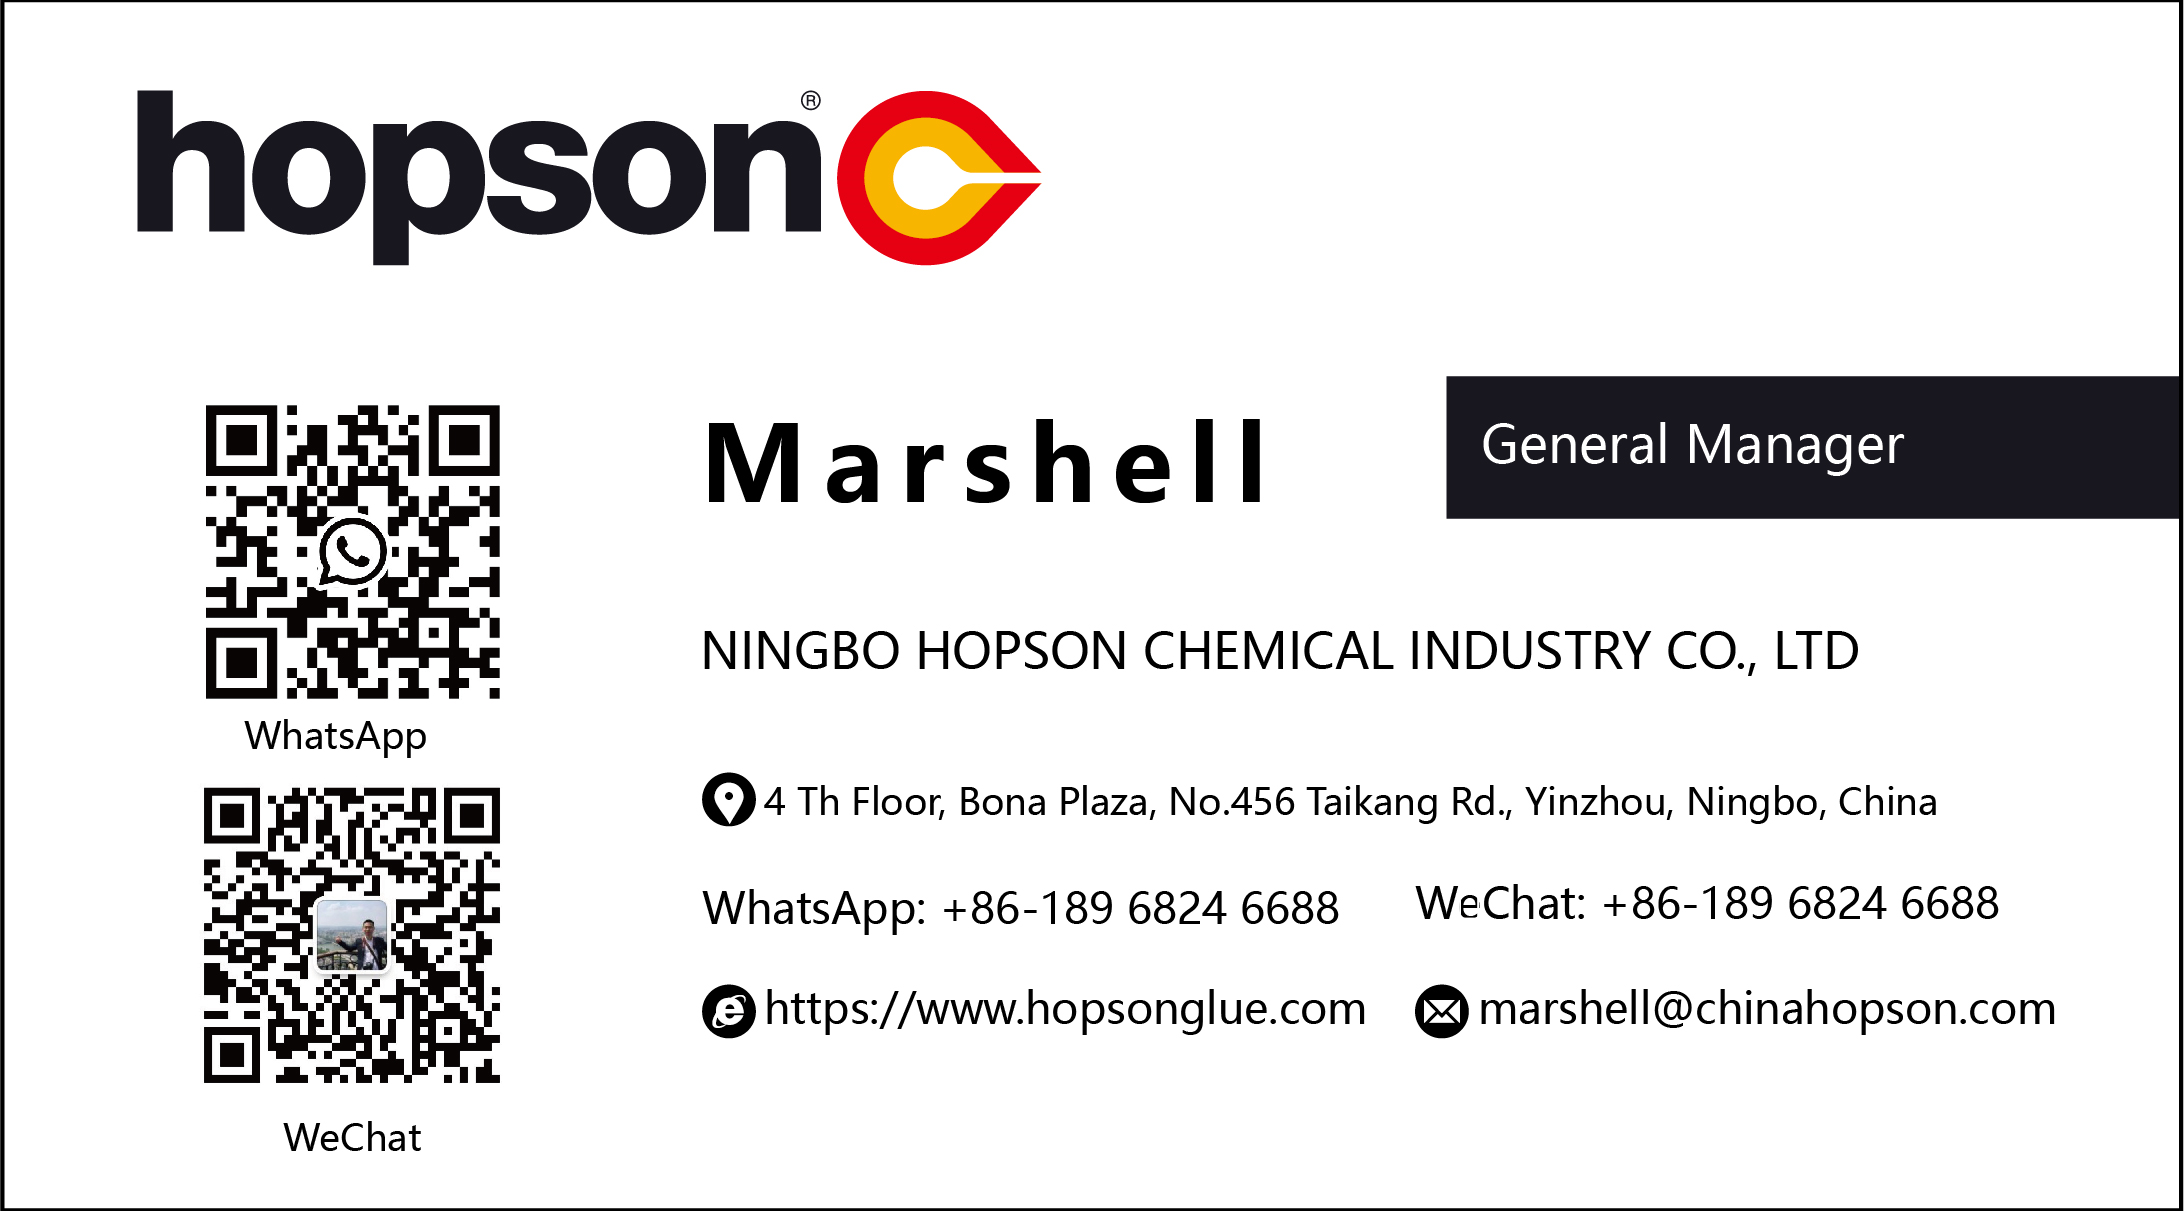 Marshell's Business Card